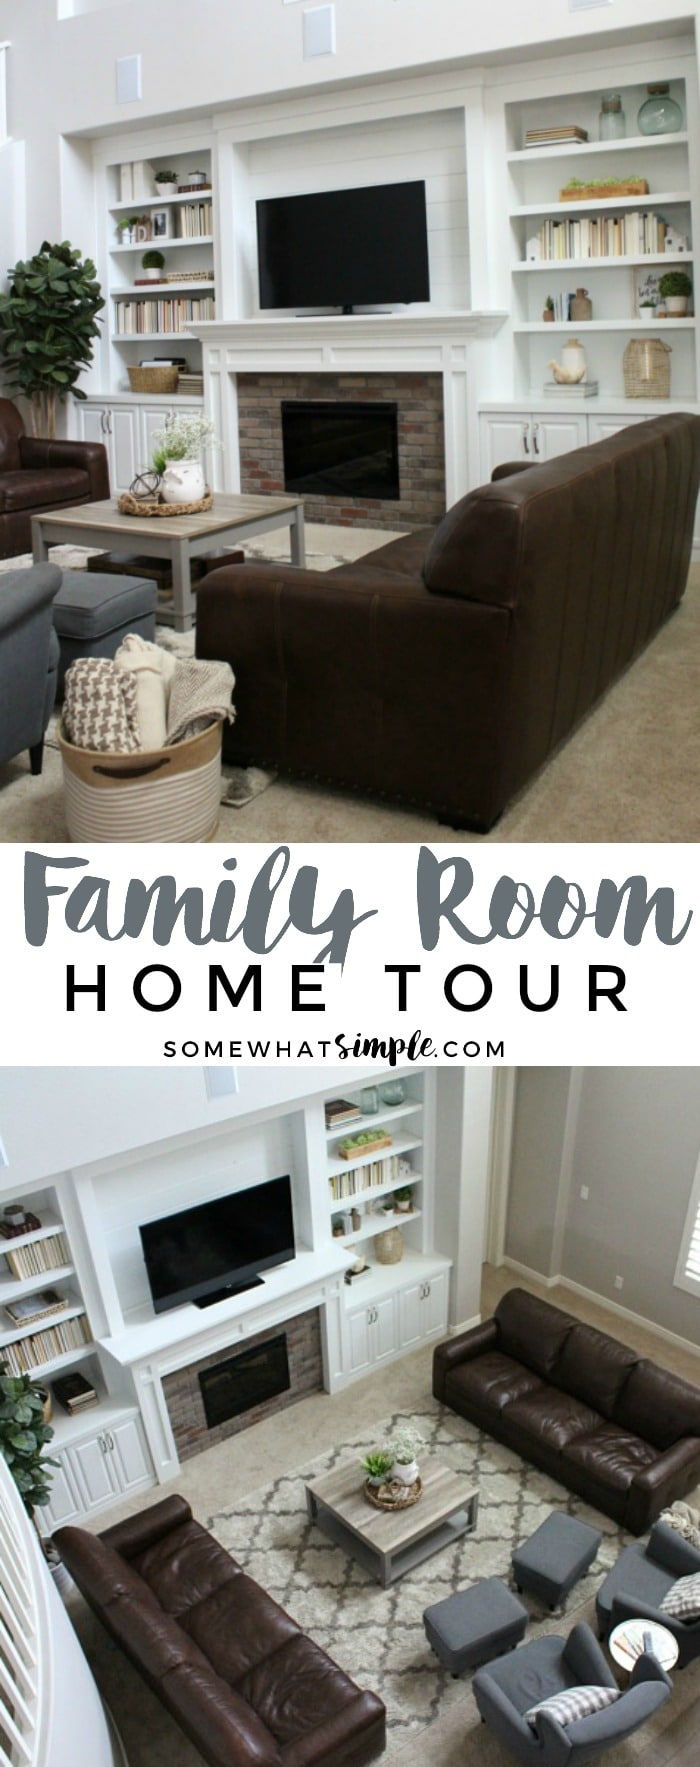 Take a peak inside our family room - one of the most-used spaces in our home!  via @somewhatsimple